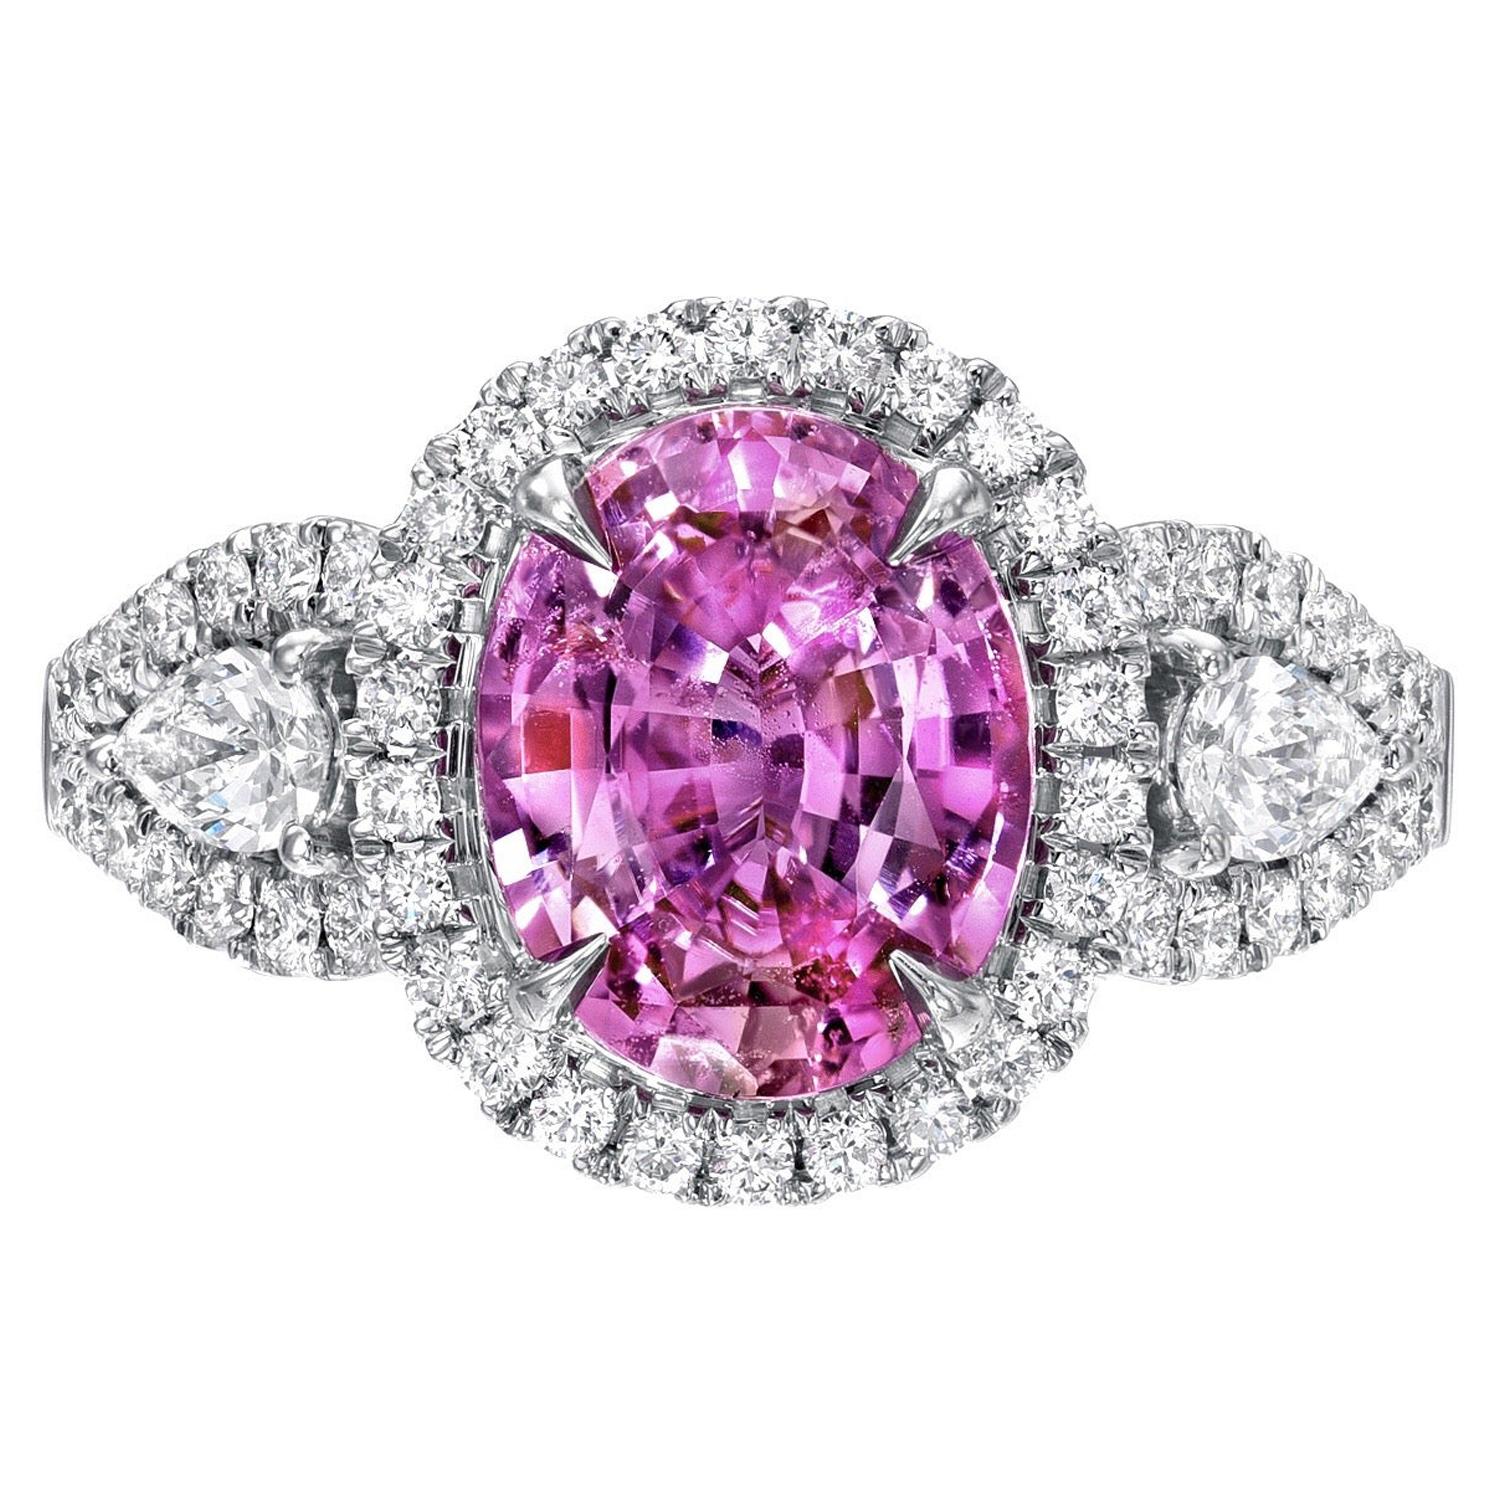 Pink Sapphire Ring 3.07 Carat Oval